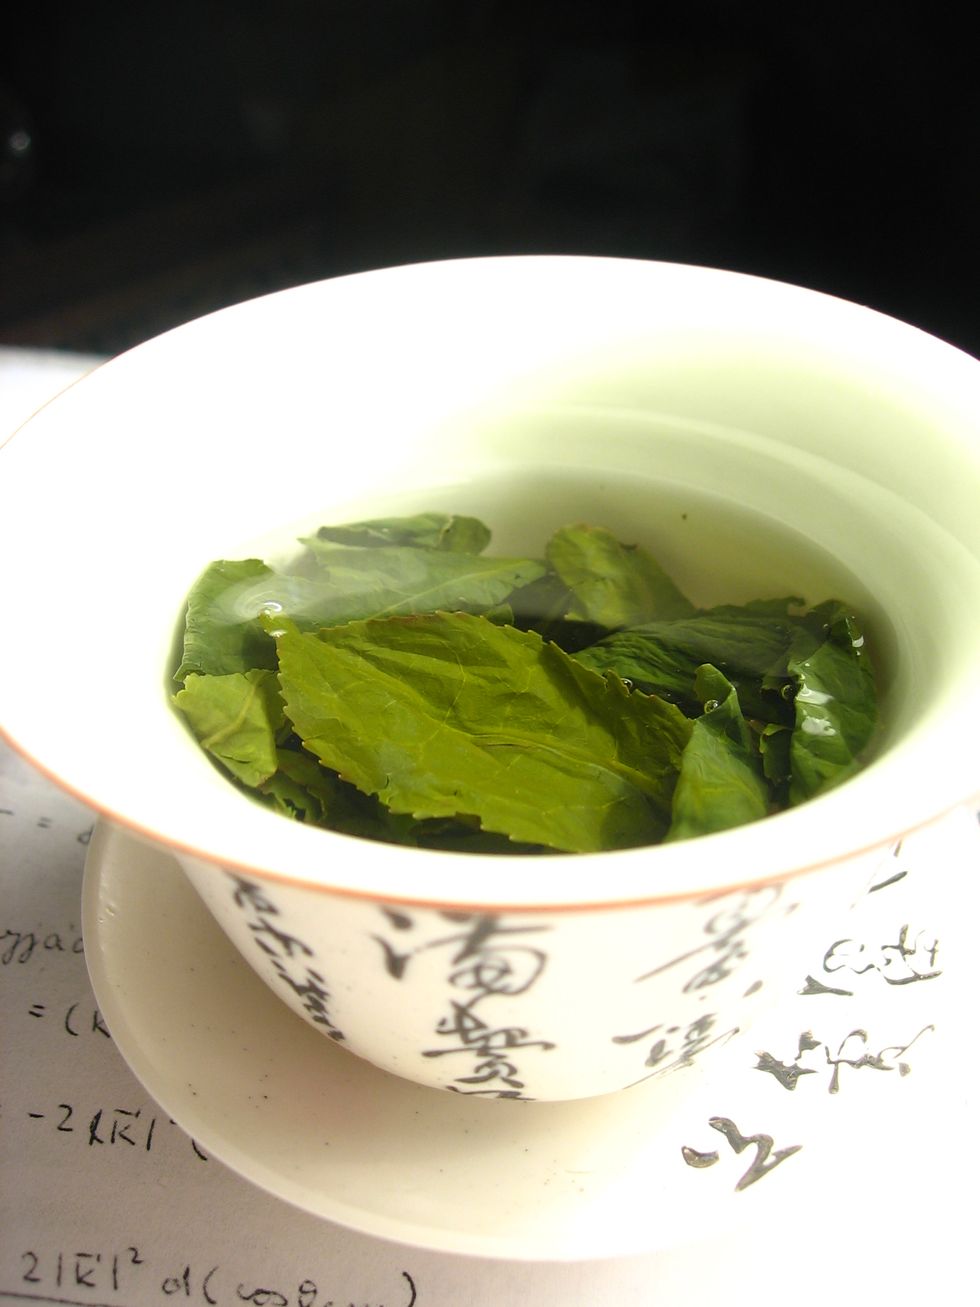 Green tea: it's good for you.